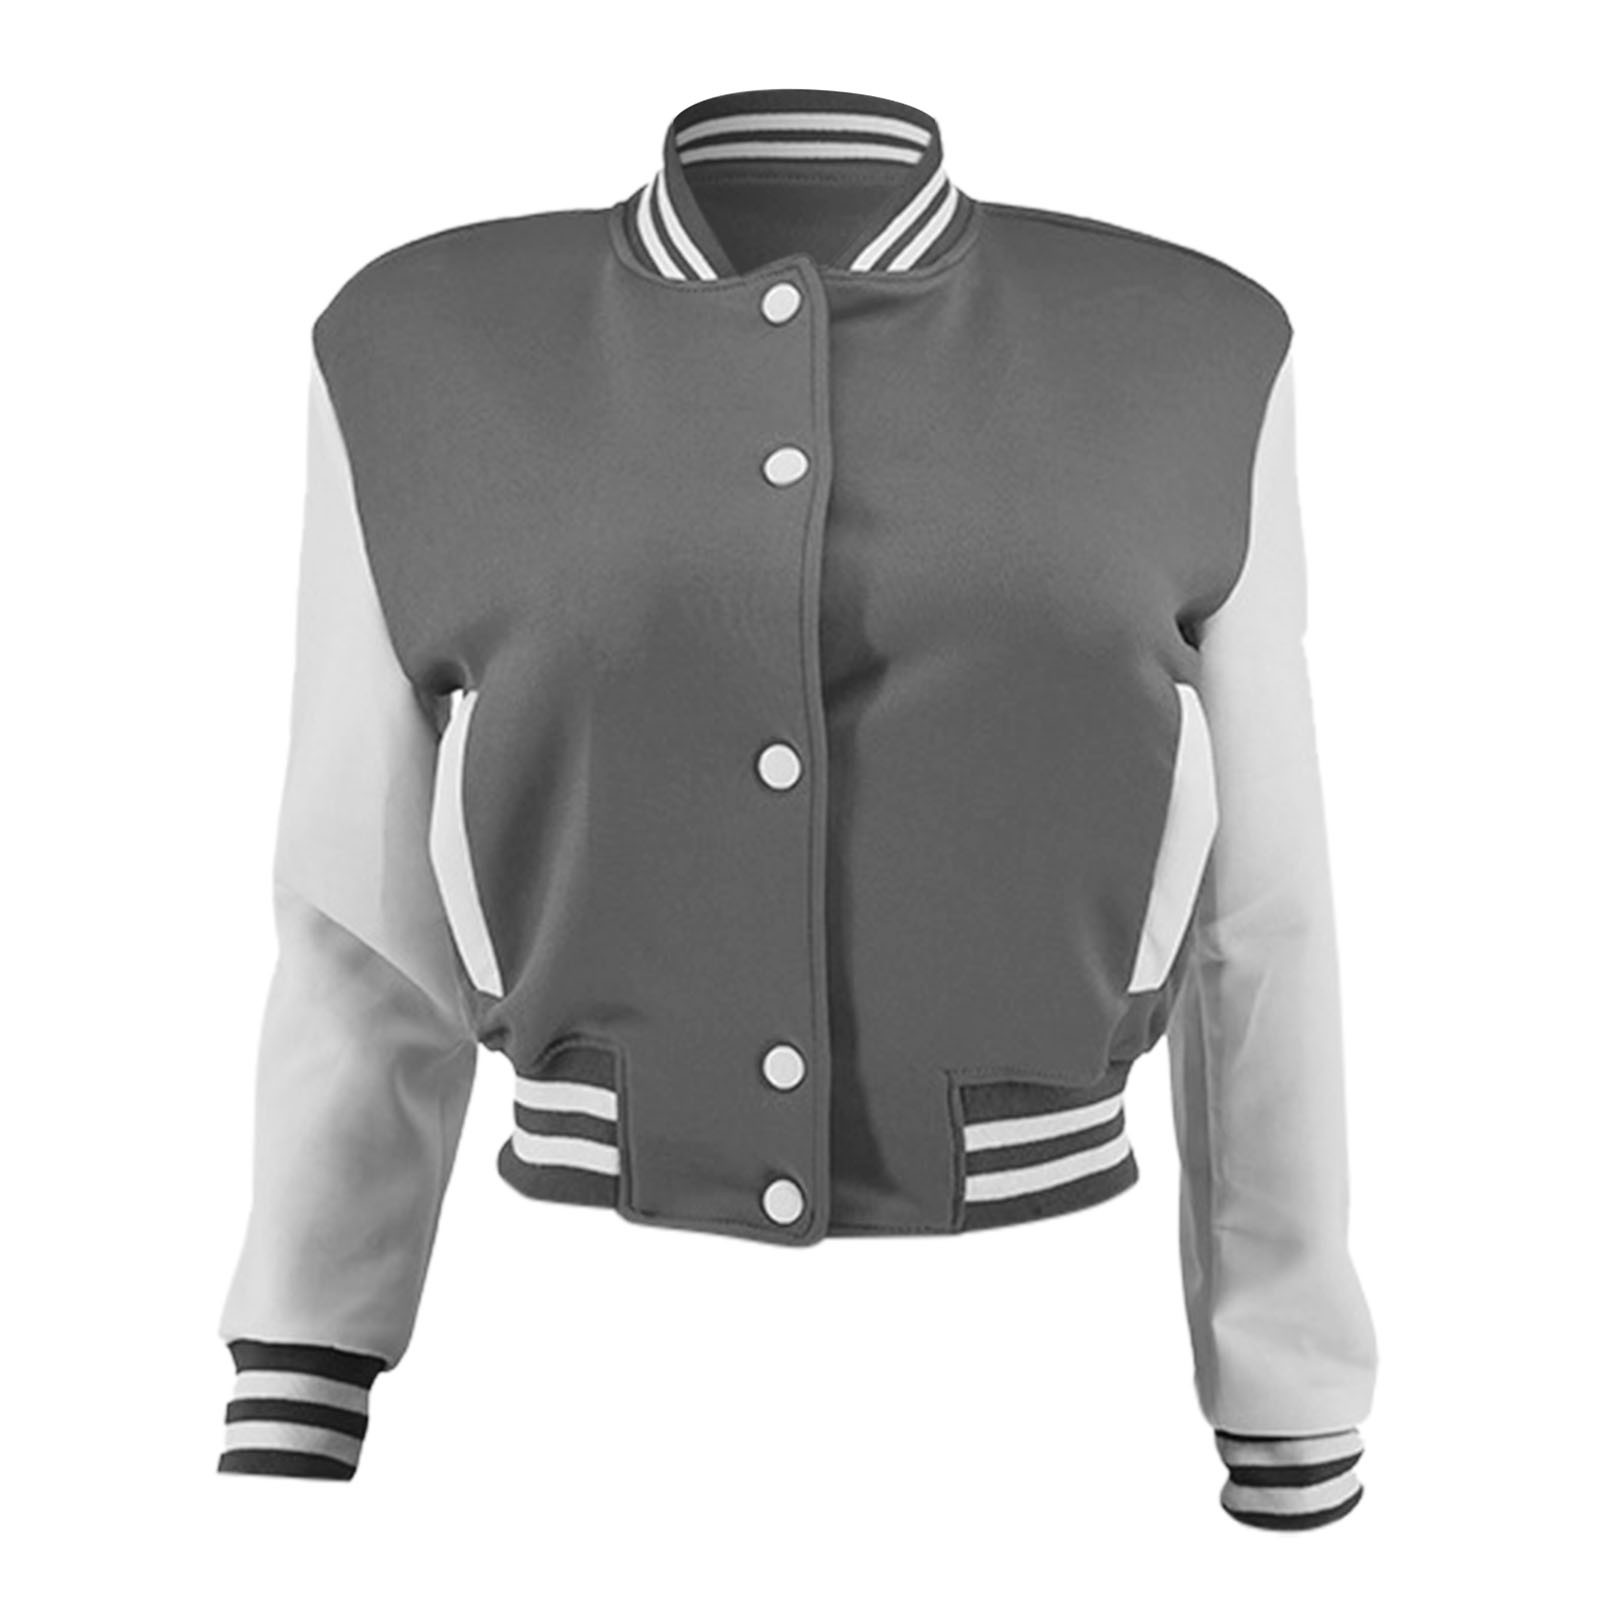 Light Jacket for Women Casual Jackets under Fashion Women Autumn Casual Patchwork Stand Collar Button Long Sleeve Pocket Coat Baseball Jackets Fashion Umbrella Women - image 5 of 6